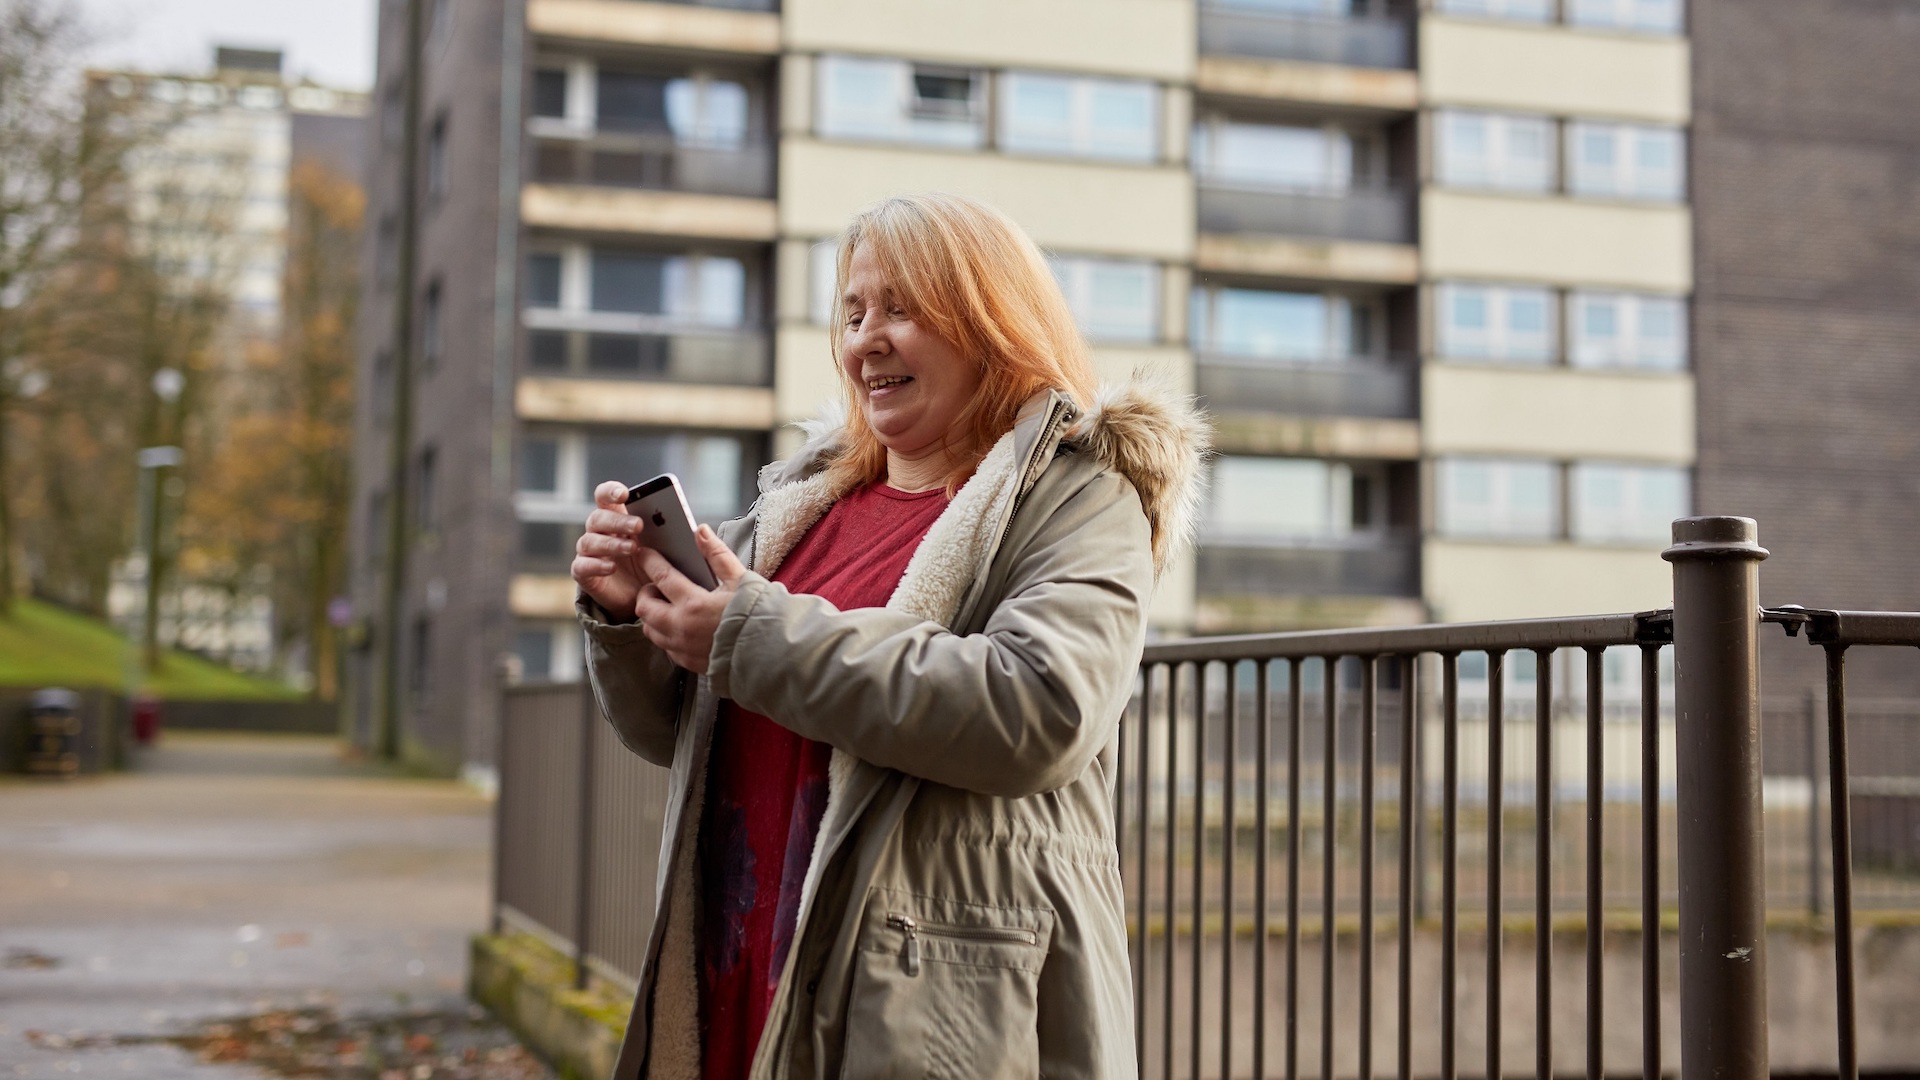 Colette holds her new phone and smiles in front of a block of flats